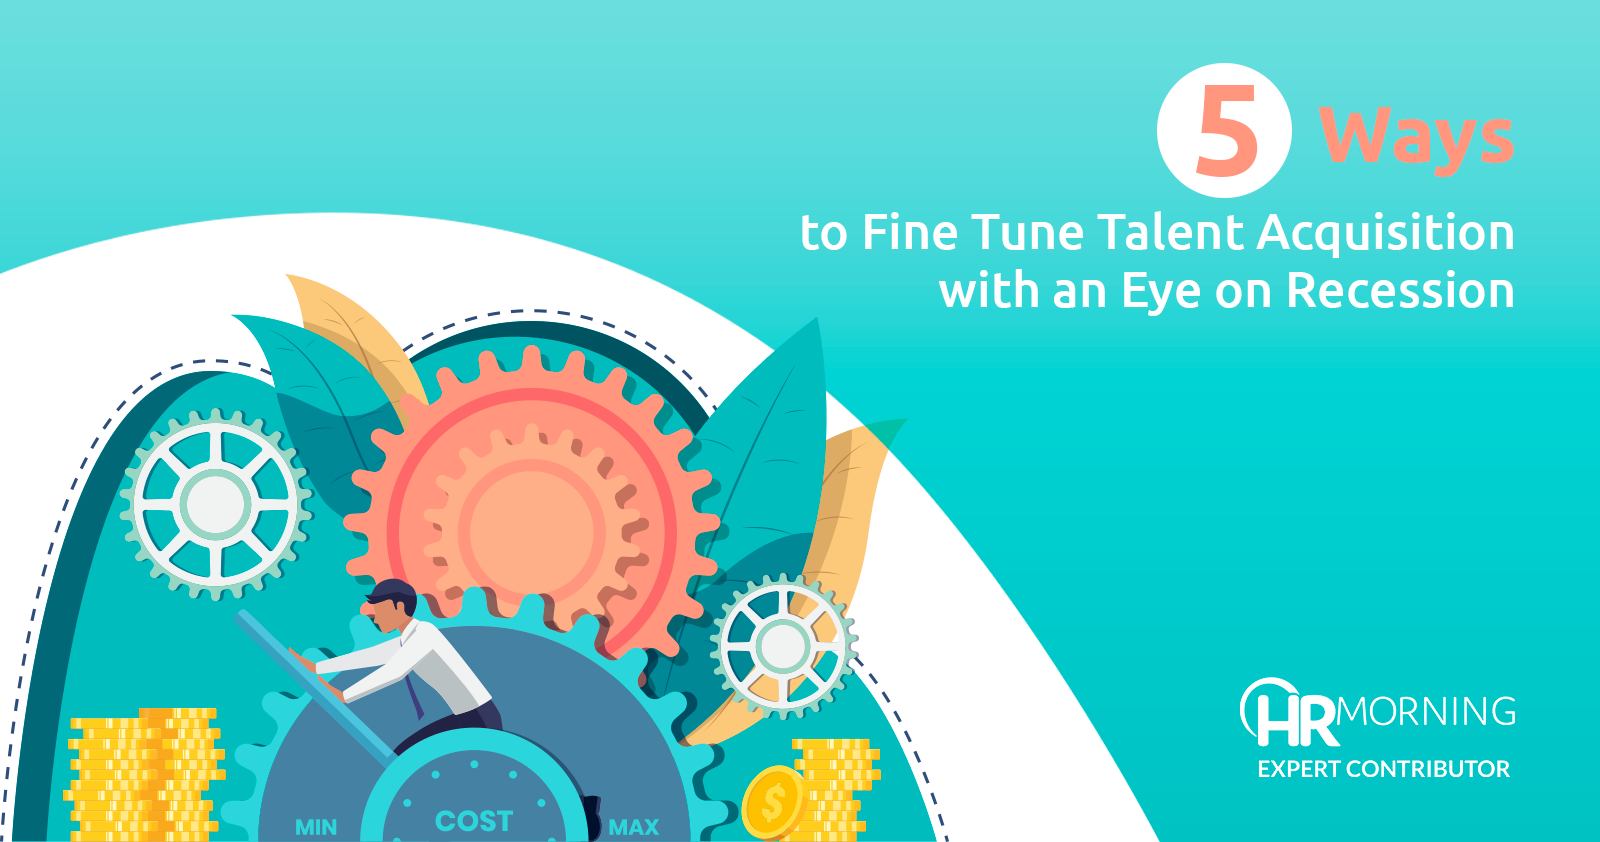 5 ways to fine tune talent acquisition with eye on recession